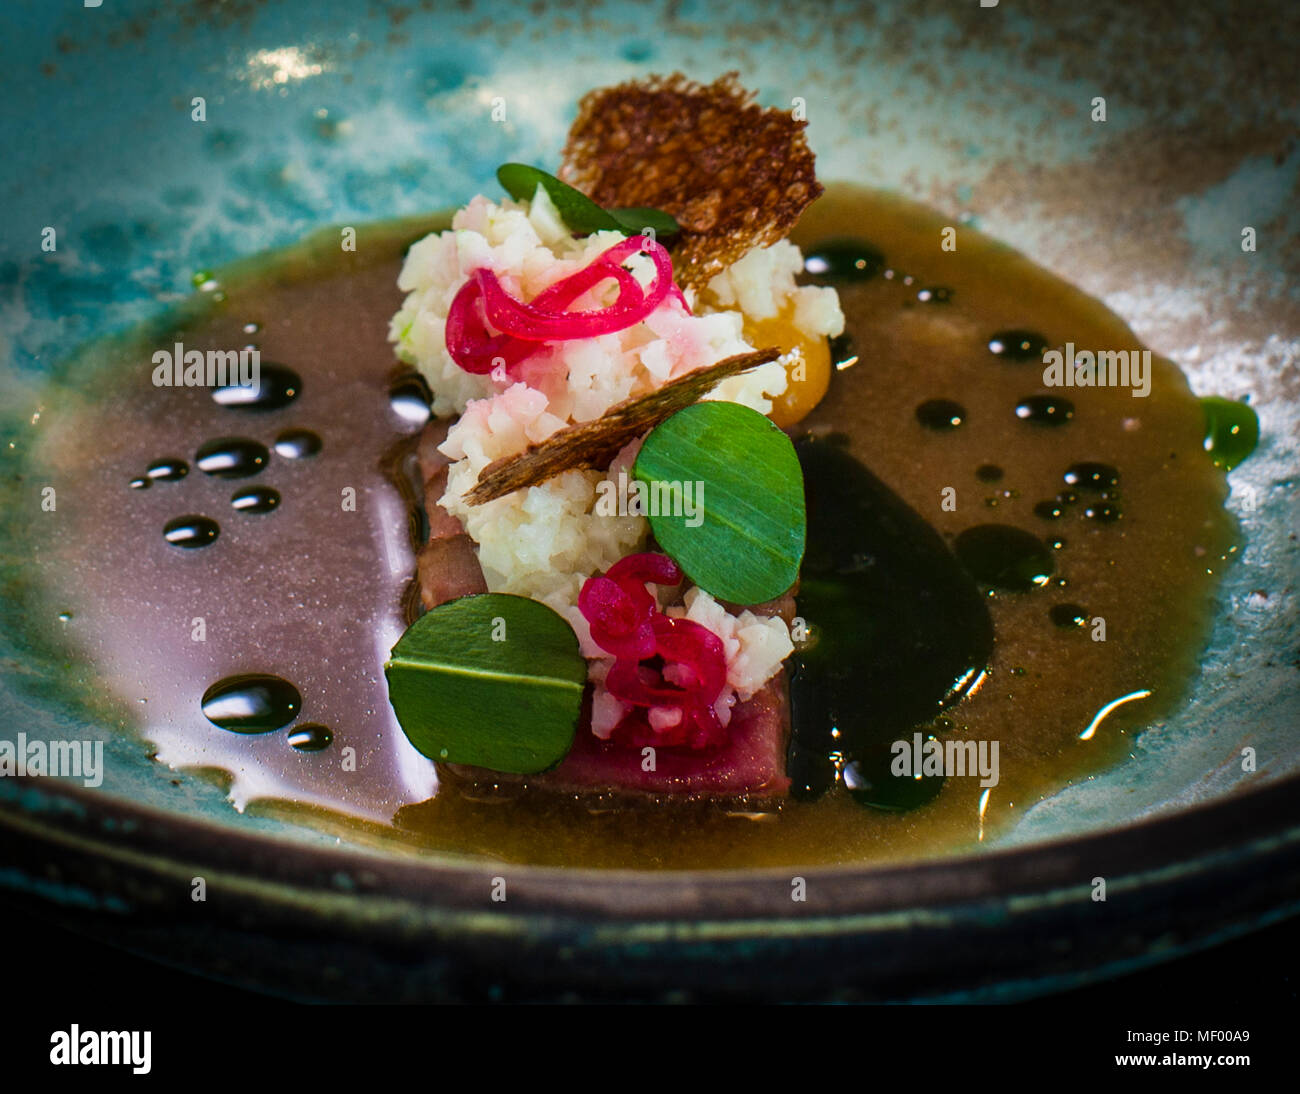 Miso Dish by German Michelin Star Chef Heiko Lacher. Restaurant Anima in Tuttlingen, Germany. Pork belly with cauliflower couscous in barley miso broth and wild garlic oil Stock Photo